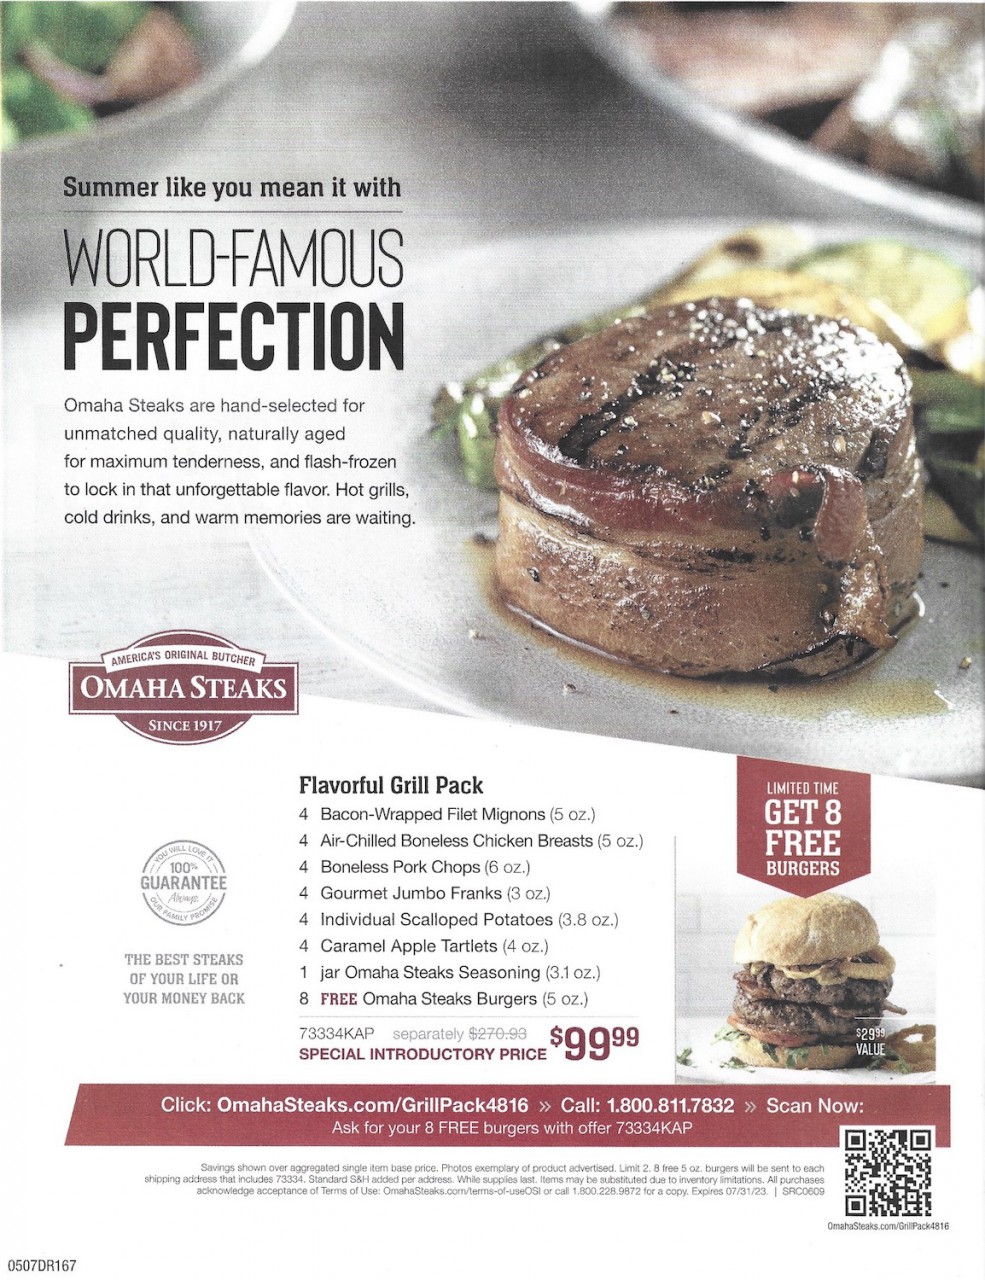 Omaha Steaks Promo Code Flavorful Grill Pack + 8 Free Burgers